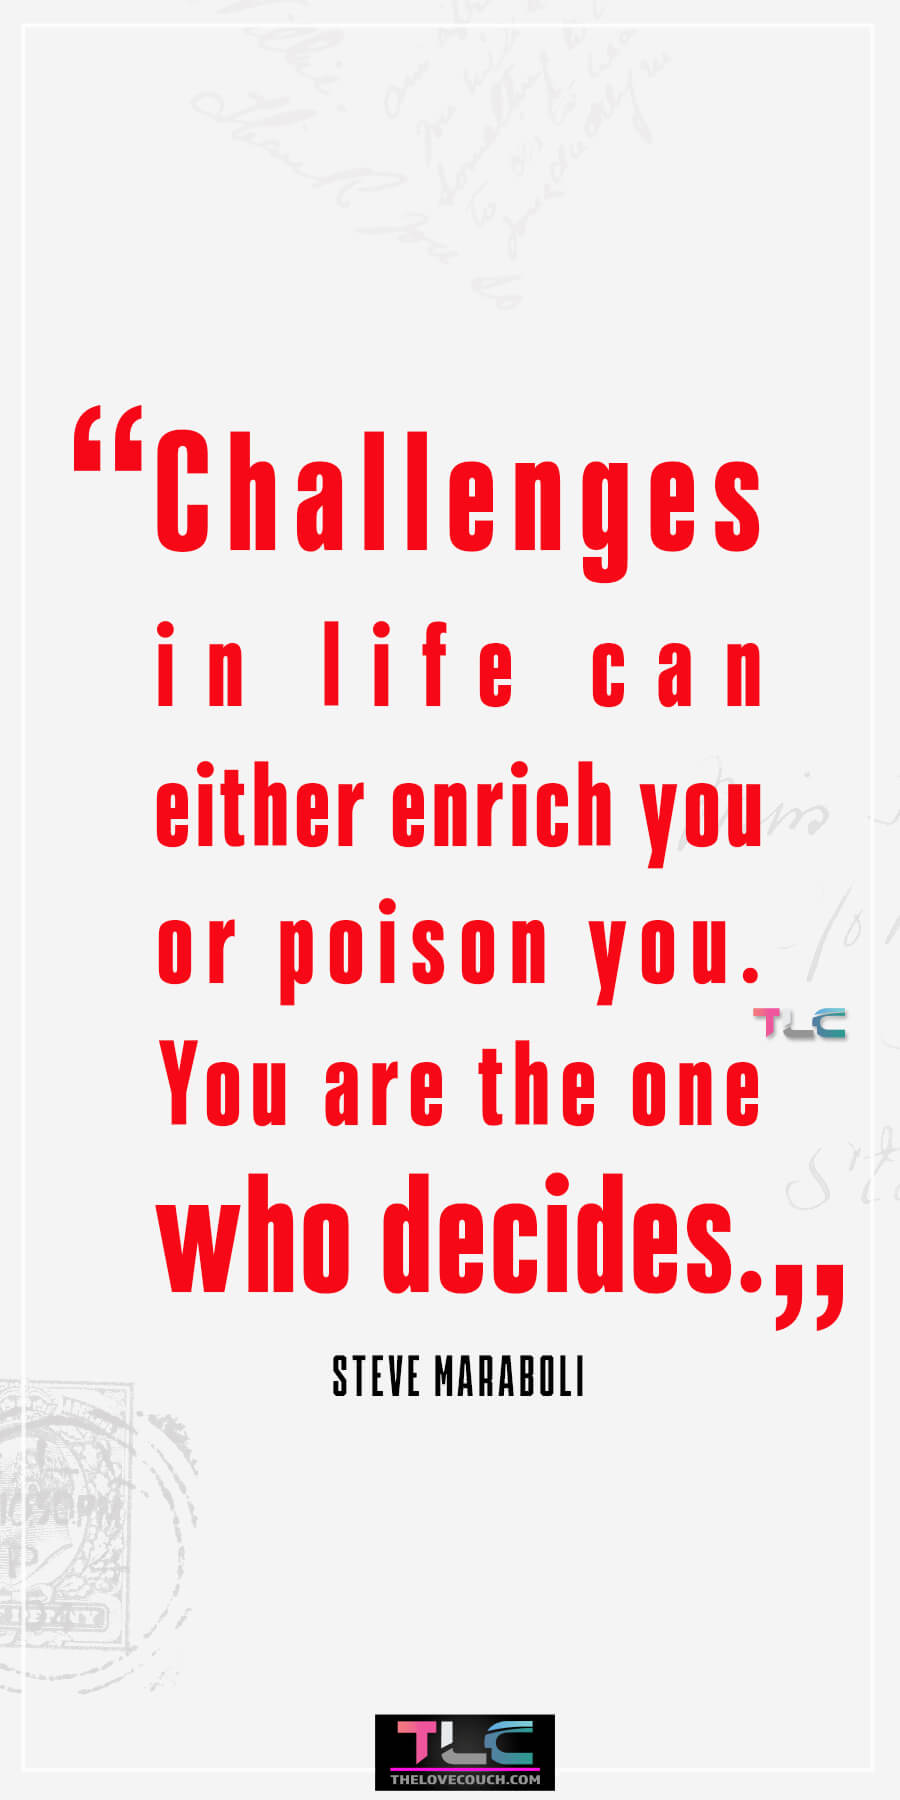 Challenges in life can either enrich you or poison you. You are the one who decides. - Steve Maraboli